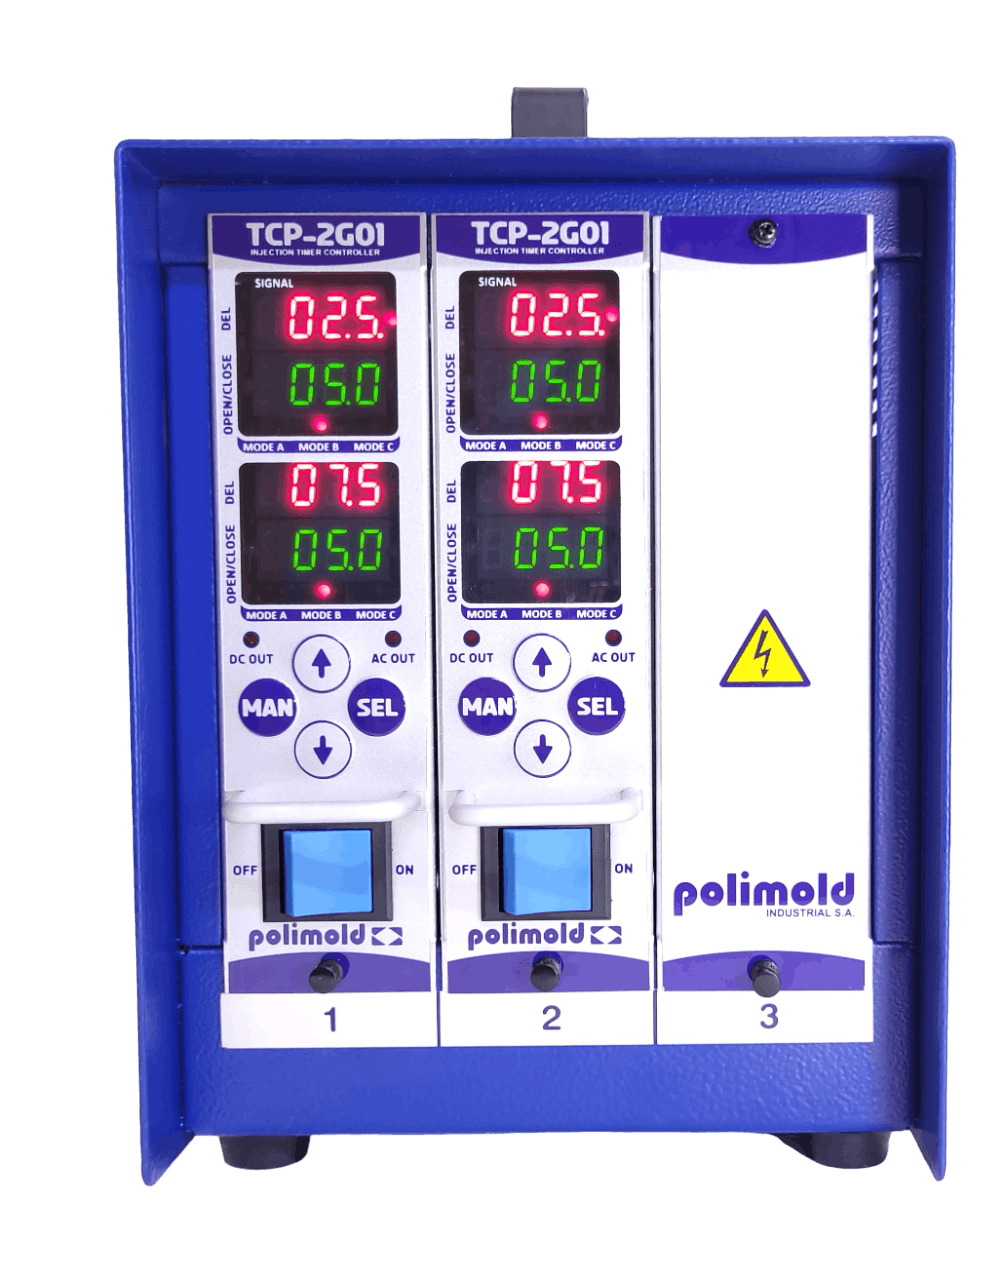 PCS&apos; Polimold valve-gate sequencer can improve part quality.